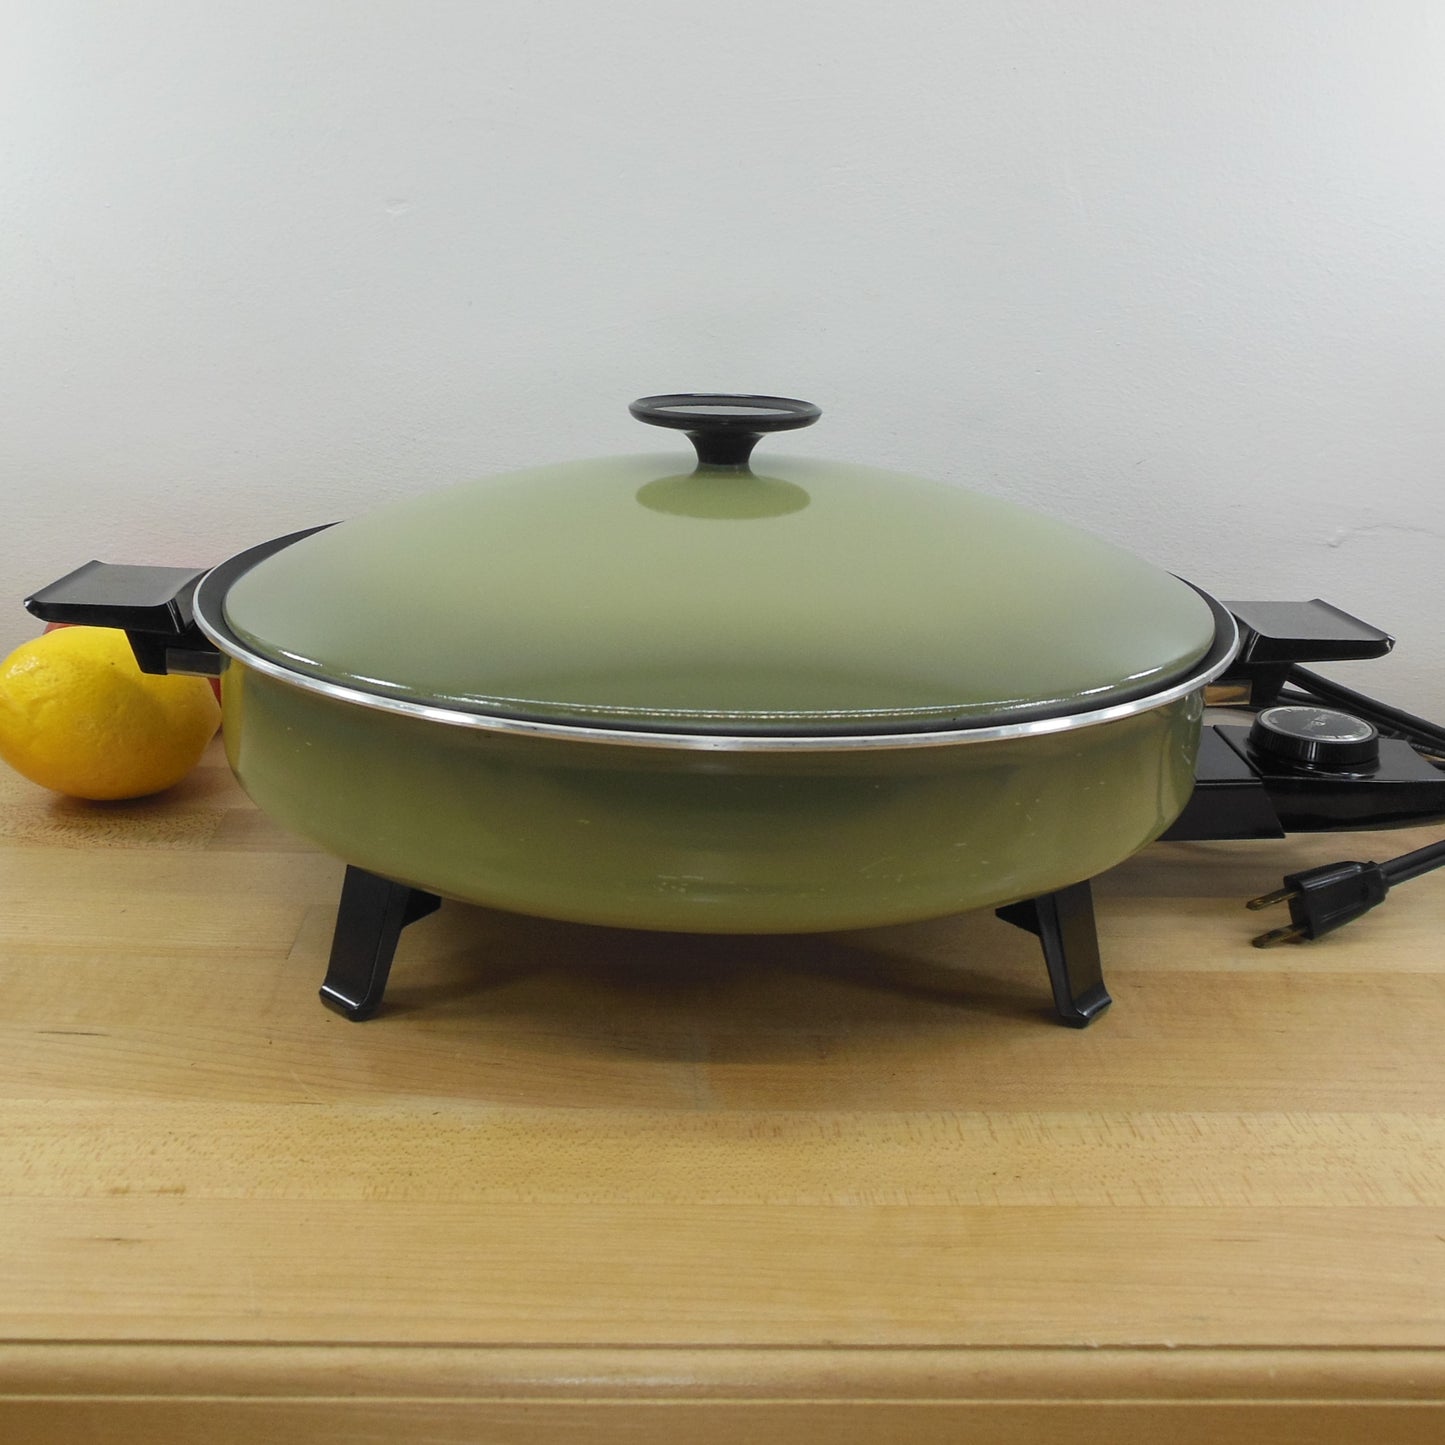 West Bend 1973 Country Inn 13350 Electric Skillet Avocado Green